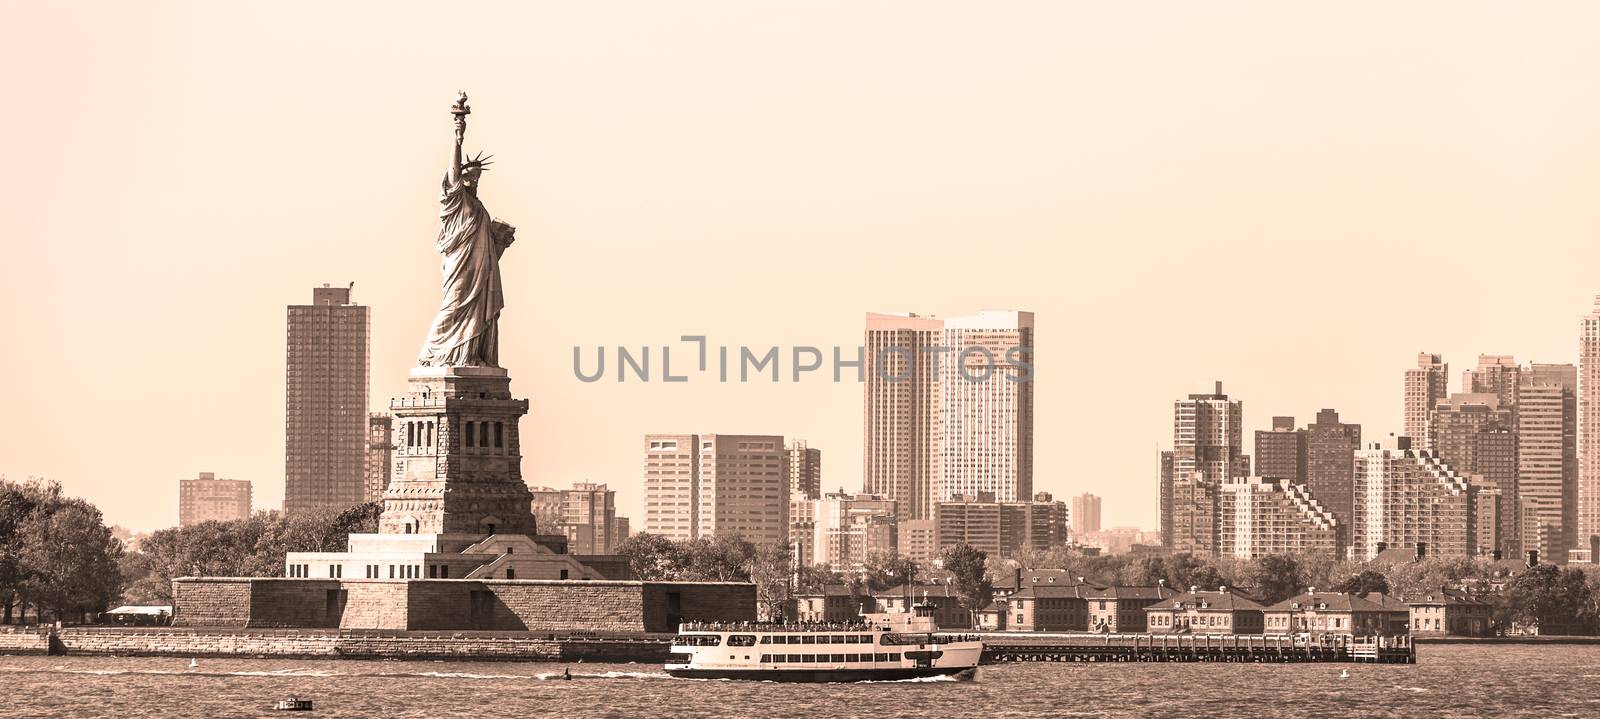 Statue of Liberty with Liberty State Park and Jersey City skyscrapers in background, USA by kasto